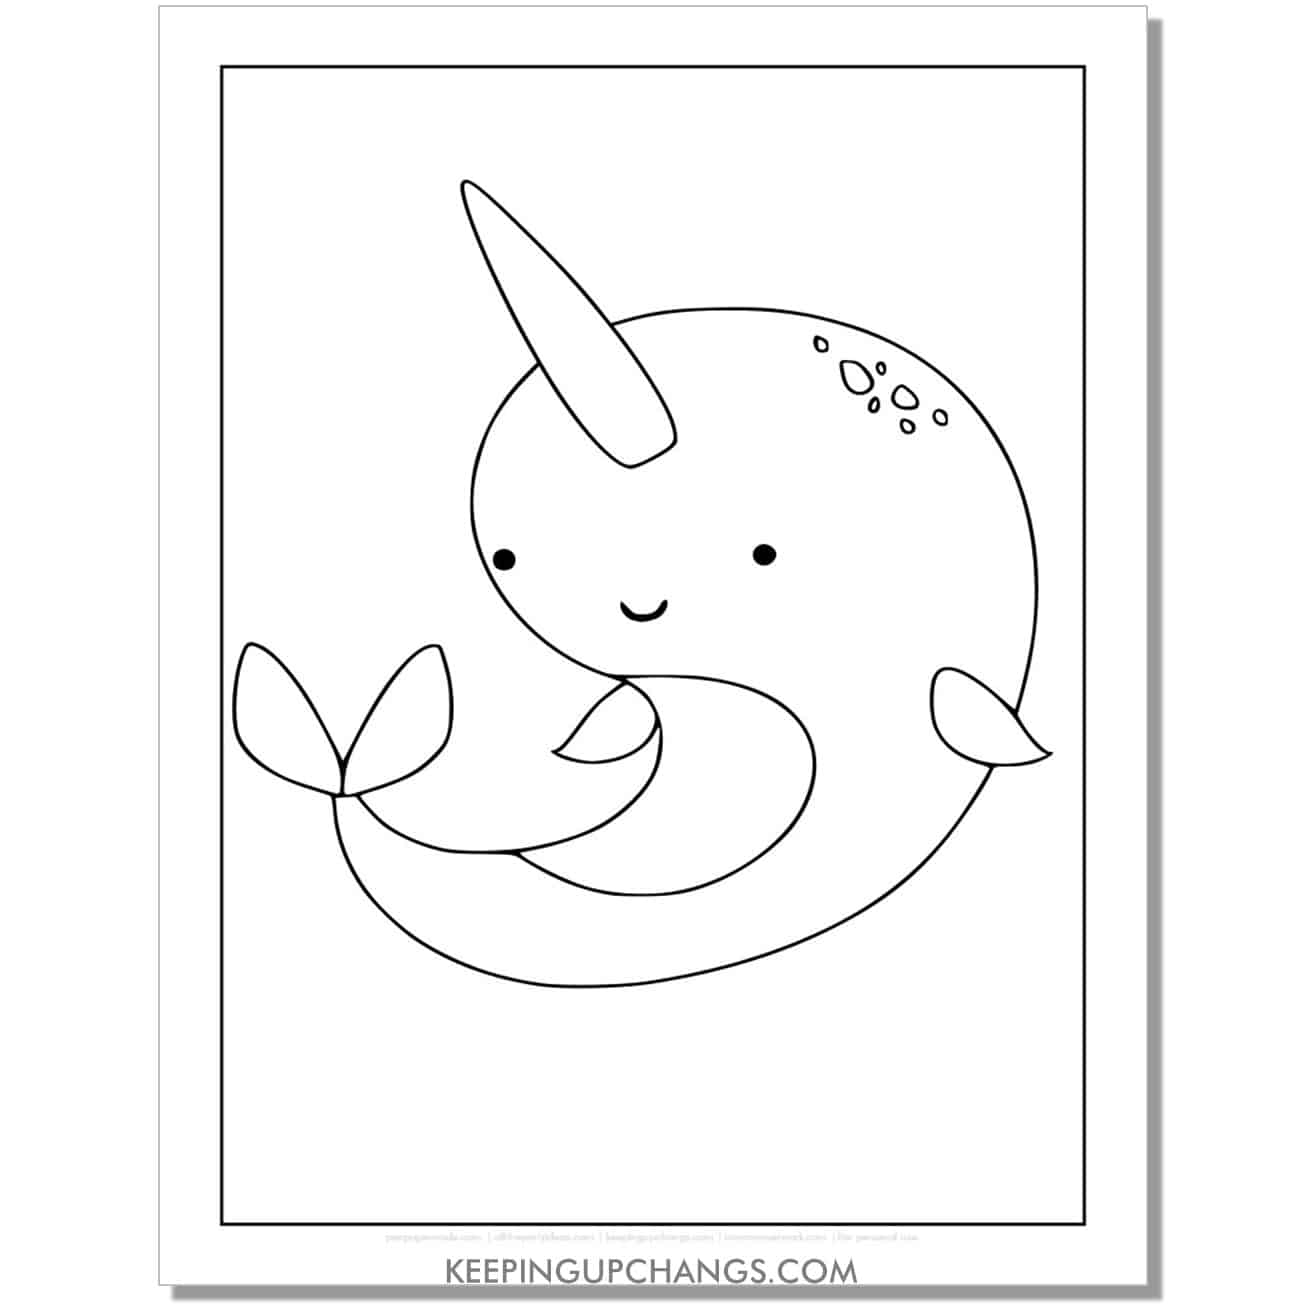 free easy, simple narwhal coloring page, sheet for toddlers, preschool.